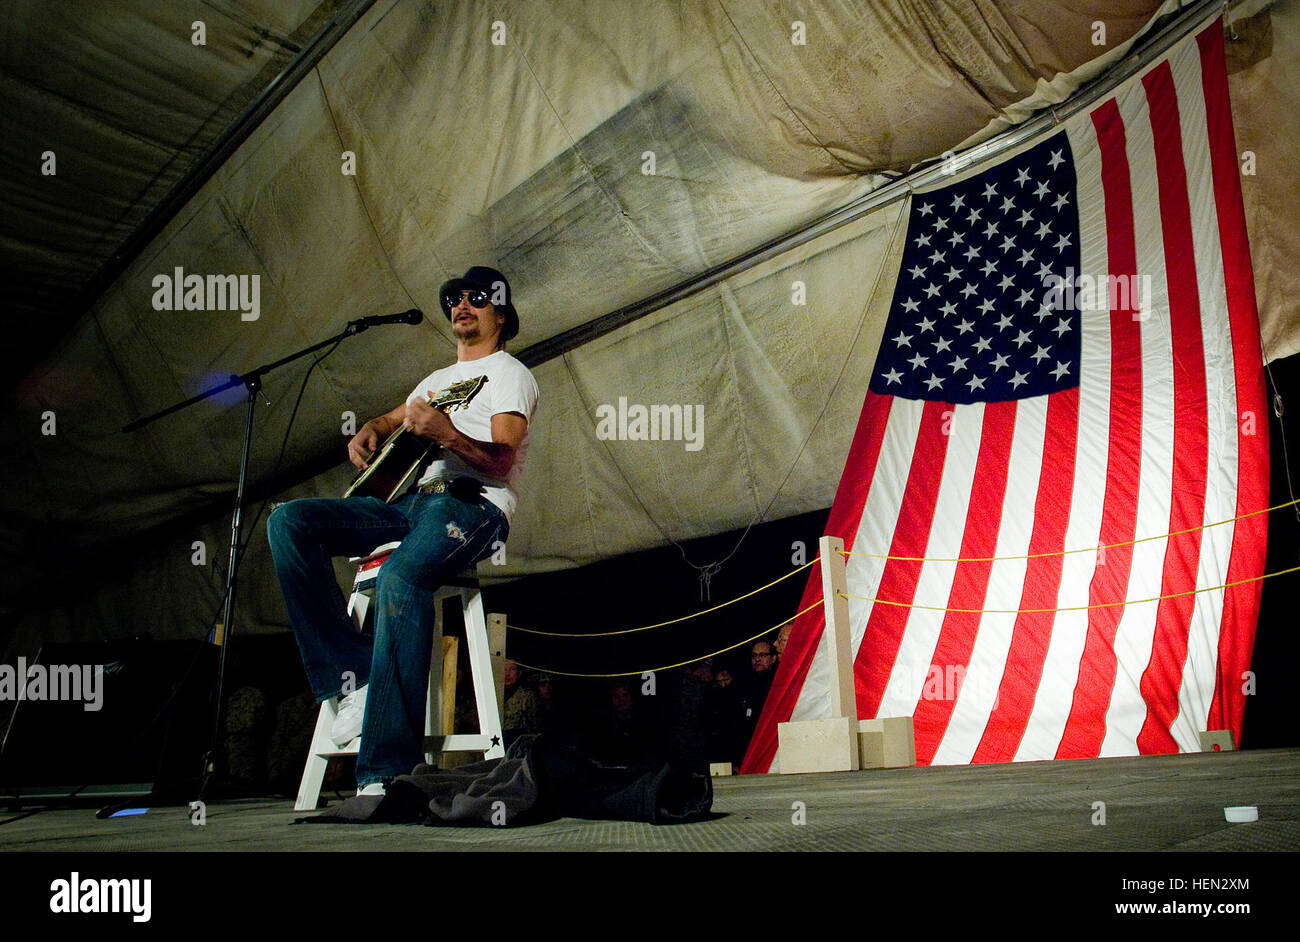 071218-N-0696M-261 Al Taqaddum, Iraq (Dec. 18, 2007) -  Kid Rock plays his set during the 2007 USO Holiday Tour stop at Al Taqaddum, Iraq, Dec. 18, 2007. Navy Adm. Mike Mullen, chairman, Joint Chiefs of Staff and tour host was joined by comedians Lewis Black and Robin Williams, 7-time Tour de France champion Lance Armstrong and Miss USA Rachel Smith on the 15-stop, 7-country tour thanking the forward deployed troops for their sacrifice and service. DoD photo by Mass Communication Specialist 1st Class Chad J. McNeeley (Released)McNeeley (Released) Kid Rock Stock Photo